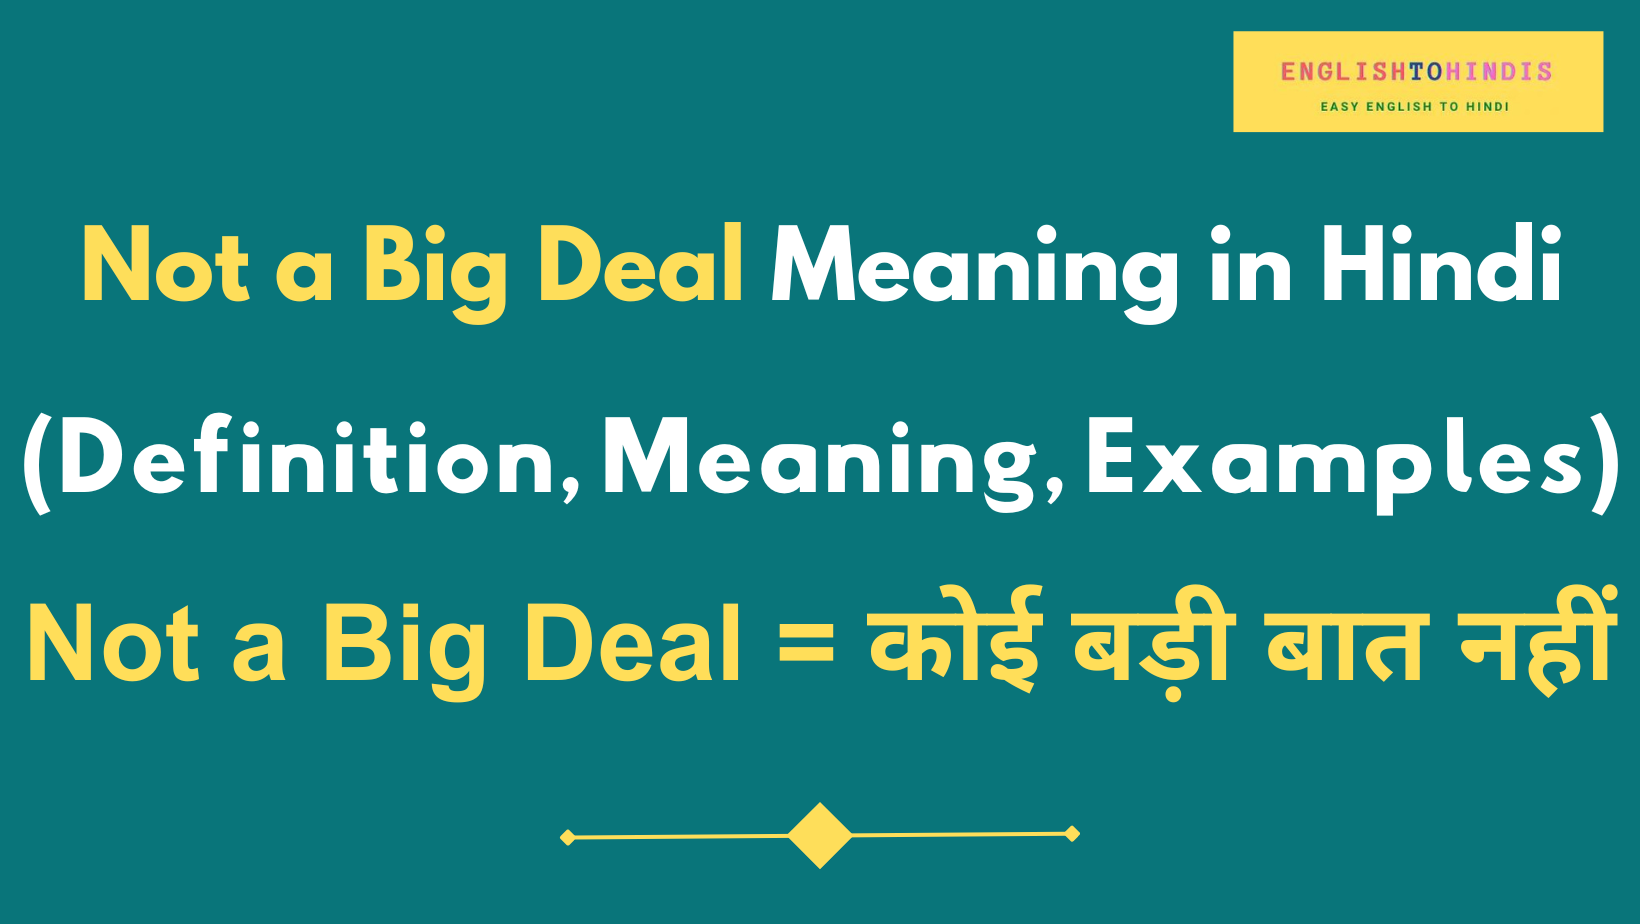 Not a Big Deal meaning in Hindi